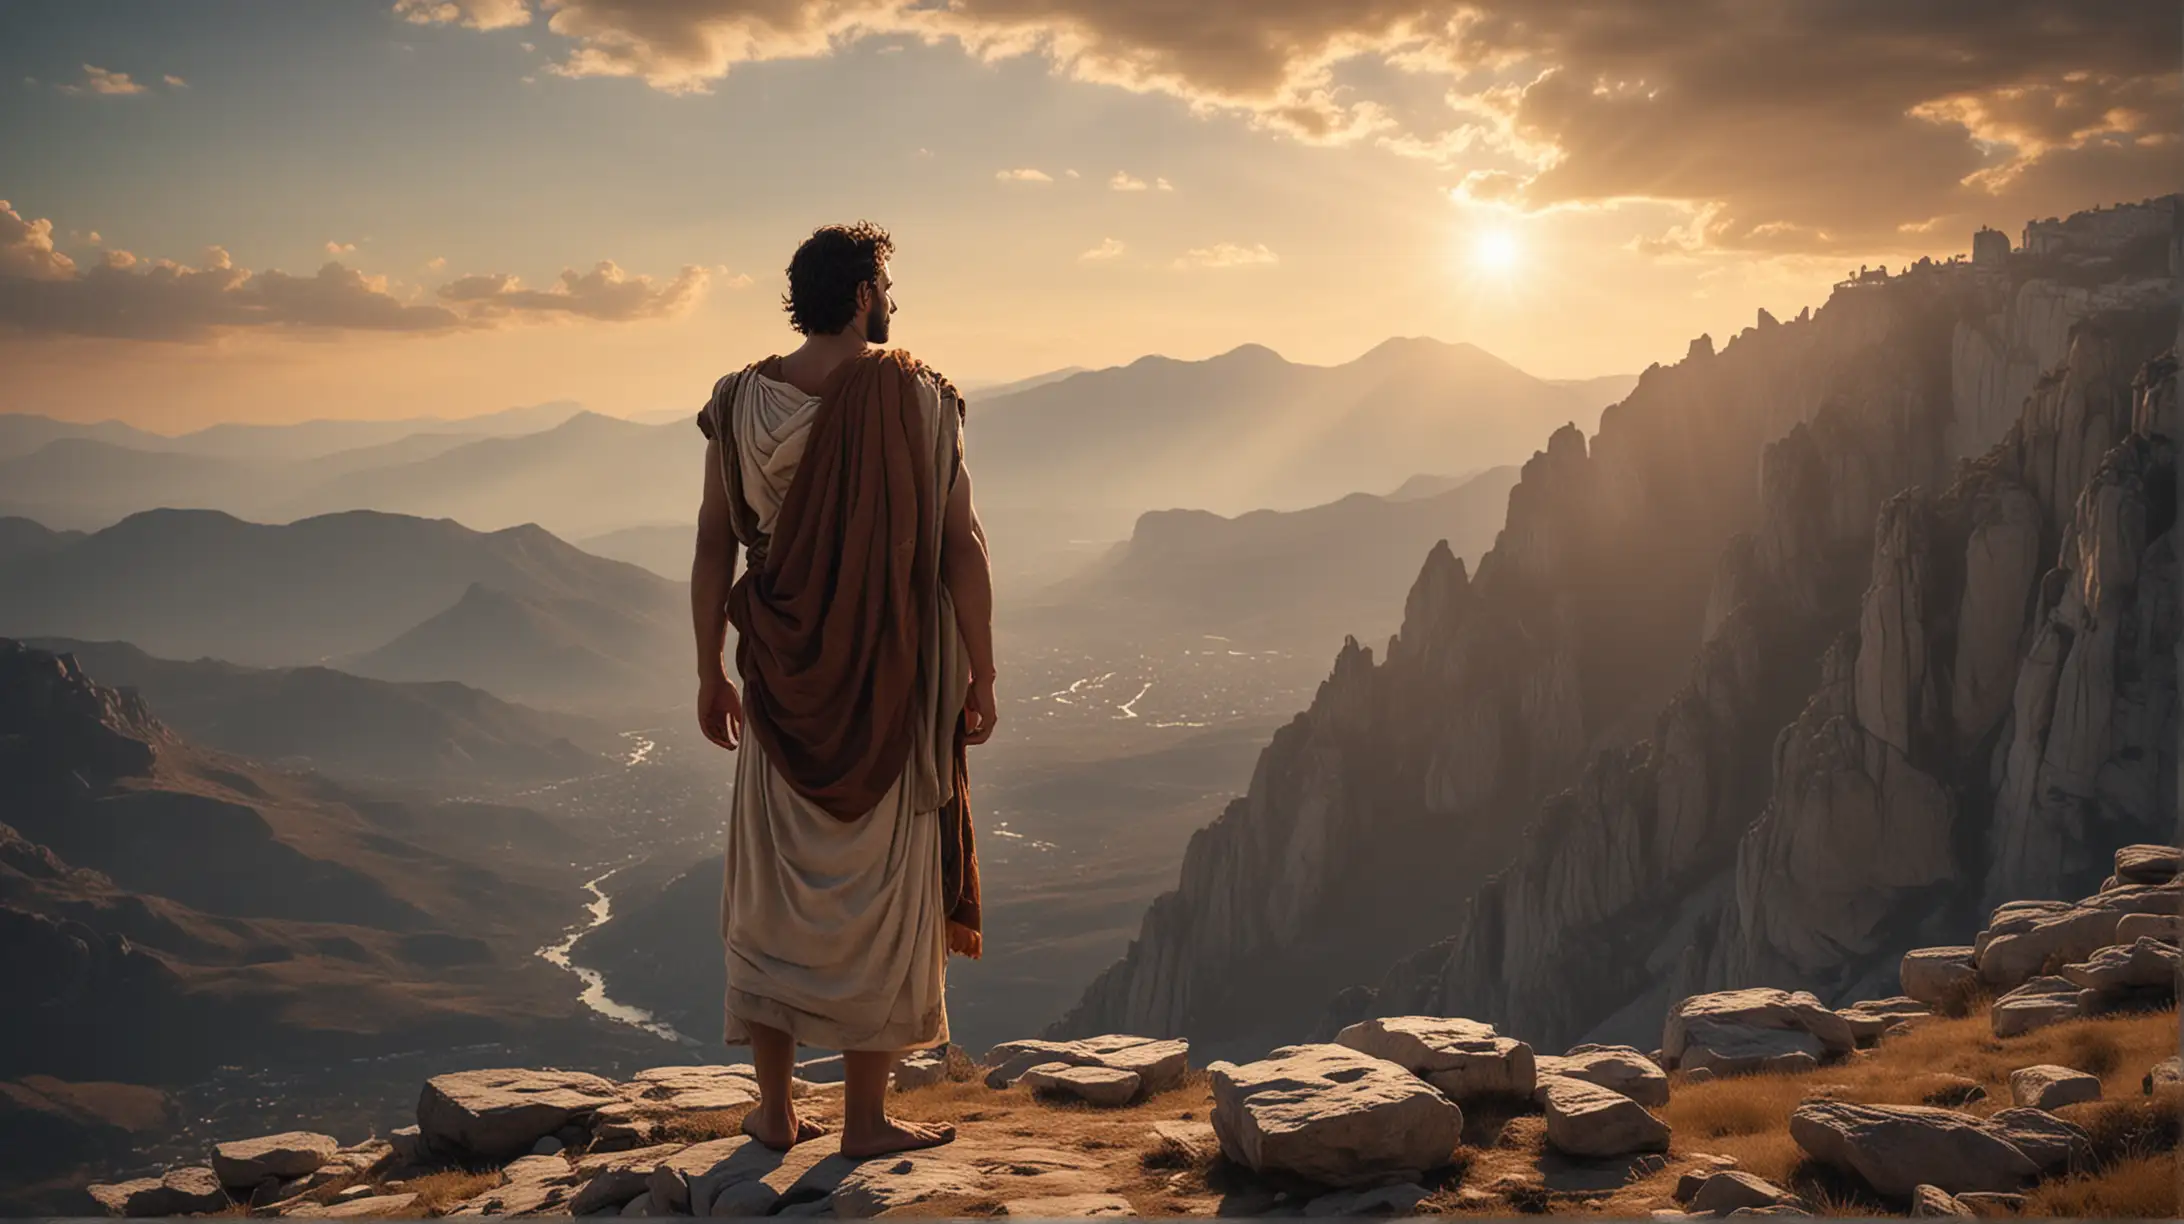 Visualization Prompt: Visualize a Greek philosopher standing on a mountaintop, looking out over a vast landscape with a sense of serenity and determination. The philosopher's muscular build exudes strength and resilience, embodying the stoic virtues of courage and fortitude.
Image Description: In the image, we see a stoic philosopher, clad in traditional Greek attire, standing confidently with his arms crossed over his chest. His gaze is fixed on the horizon, where the sun is rising, casting a warm glow over the rugged terrain below. Behind him, tall mountains rise majestically into the sky, symbolizing the challenges he has overcome on his journey to wisdom and enlightenment.